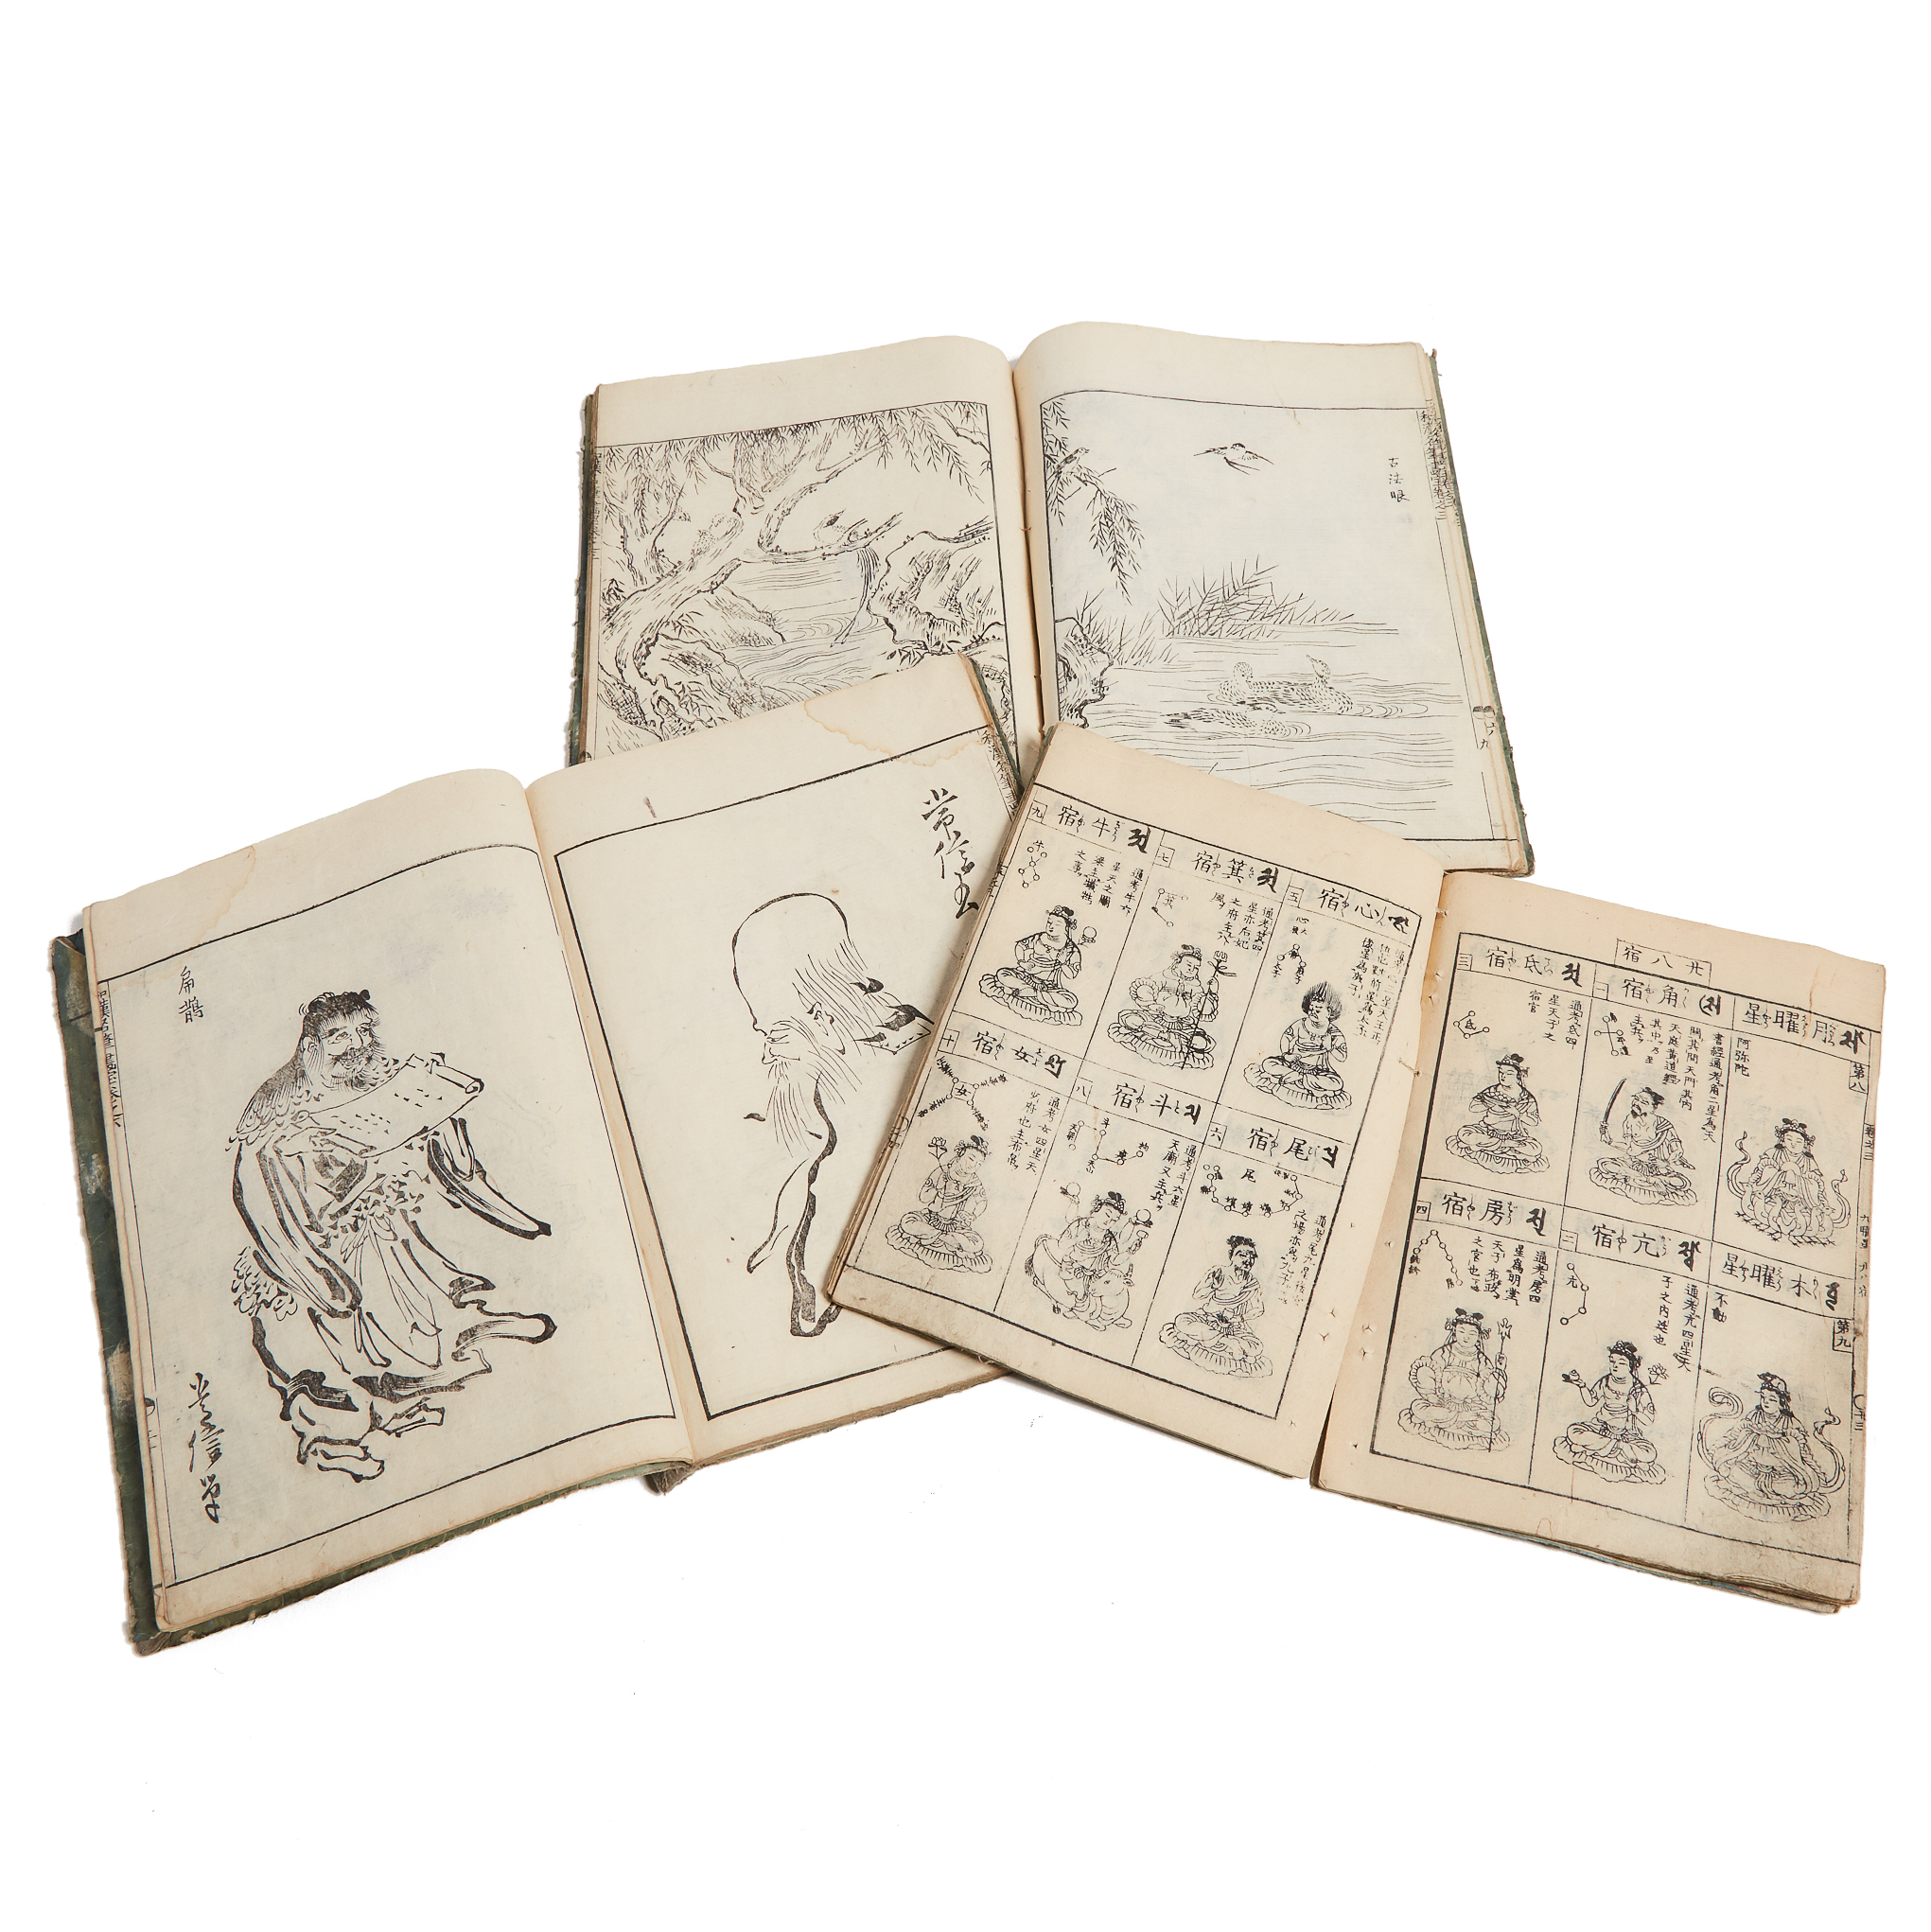 One Volume of Buddhist Figures and Their Attributes, and Volumes Three and Five of Yoshimura Shuzan's Wakan Meihitsu Gaho, 18th Century or Later